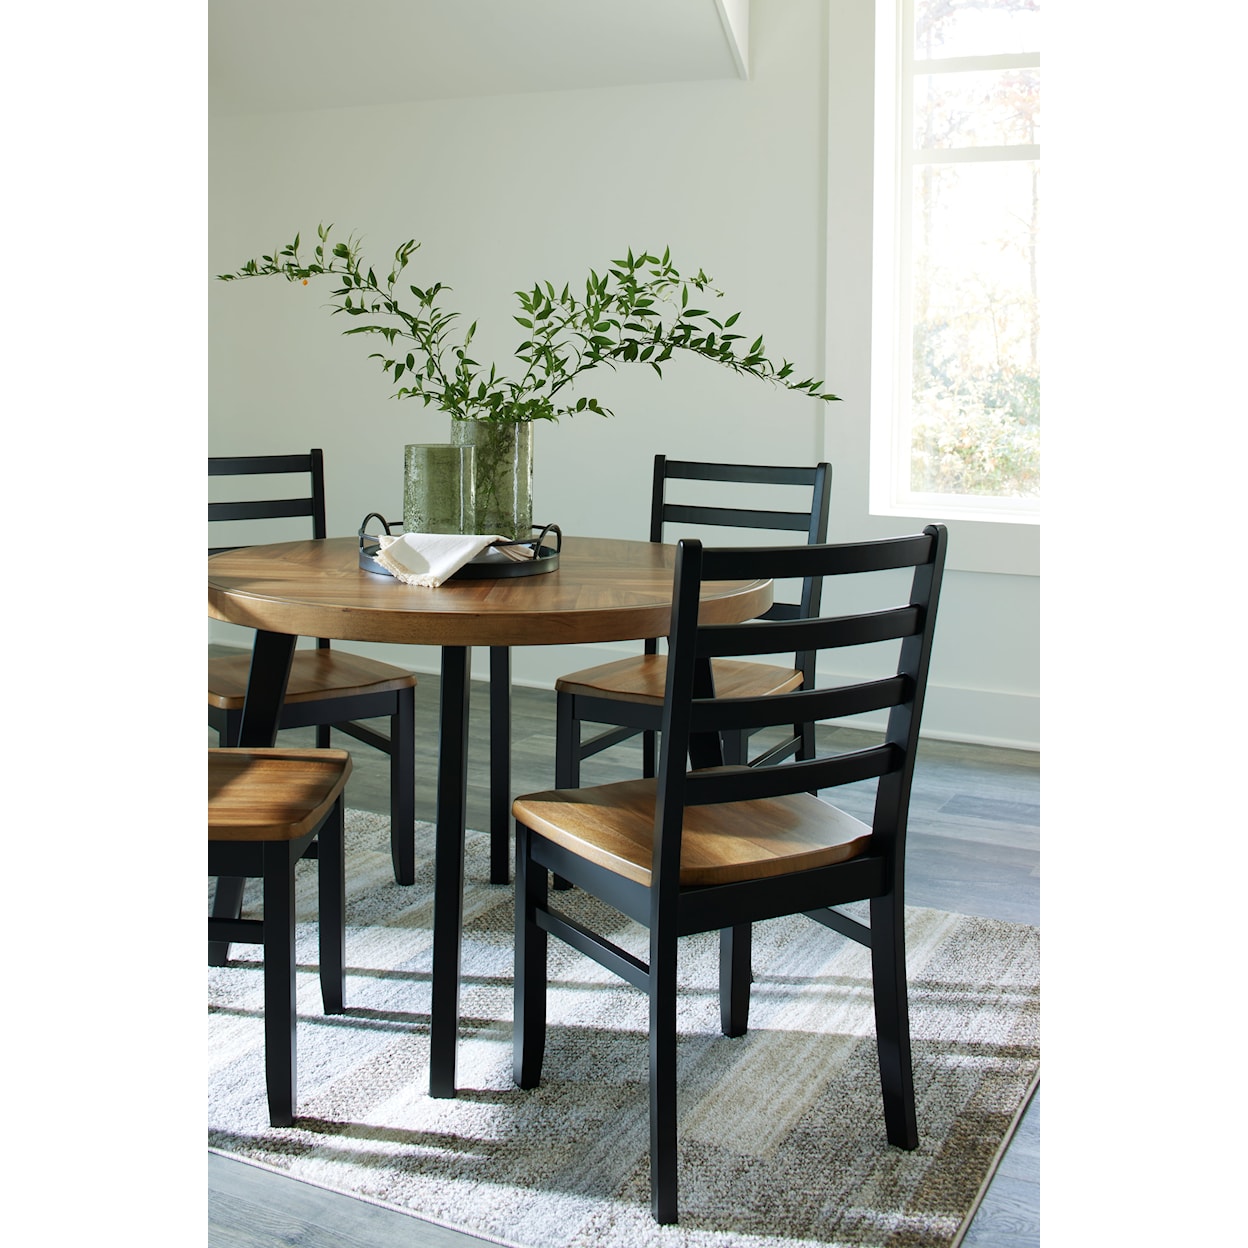 Benchcraft Blondon Dining Table And 4 Chairs (Set Of 5)